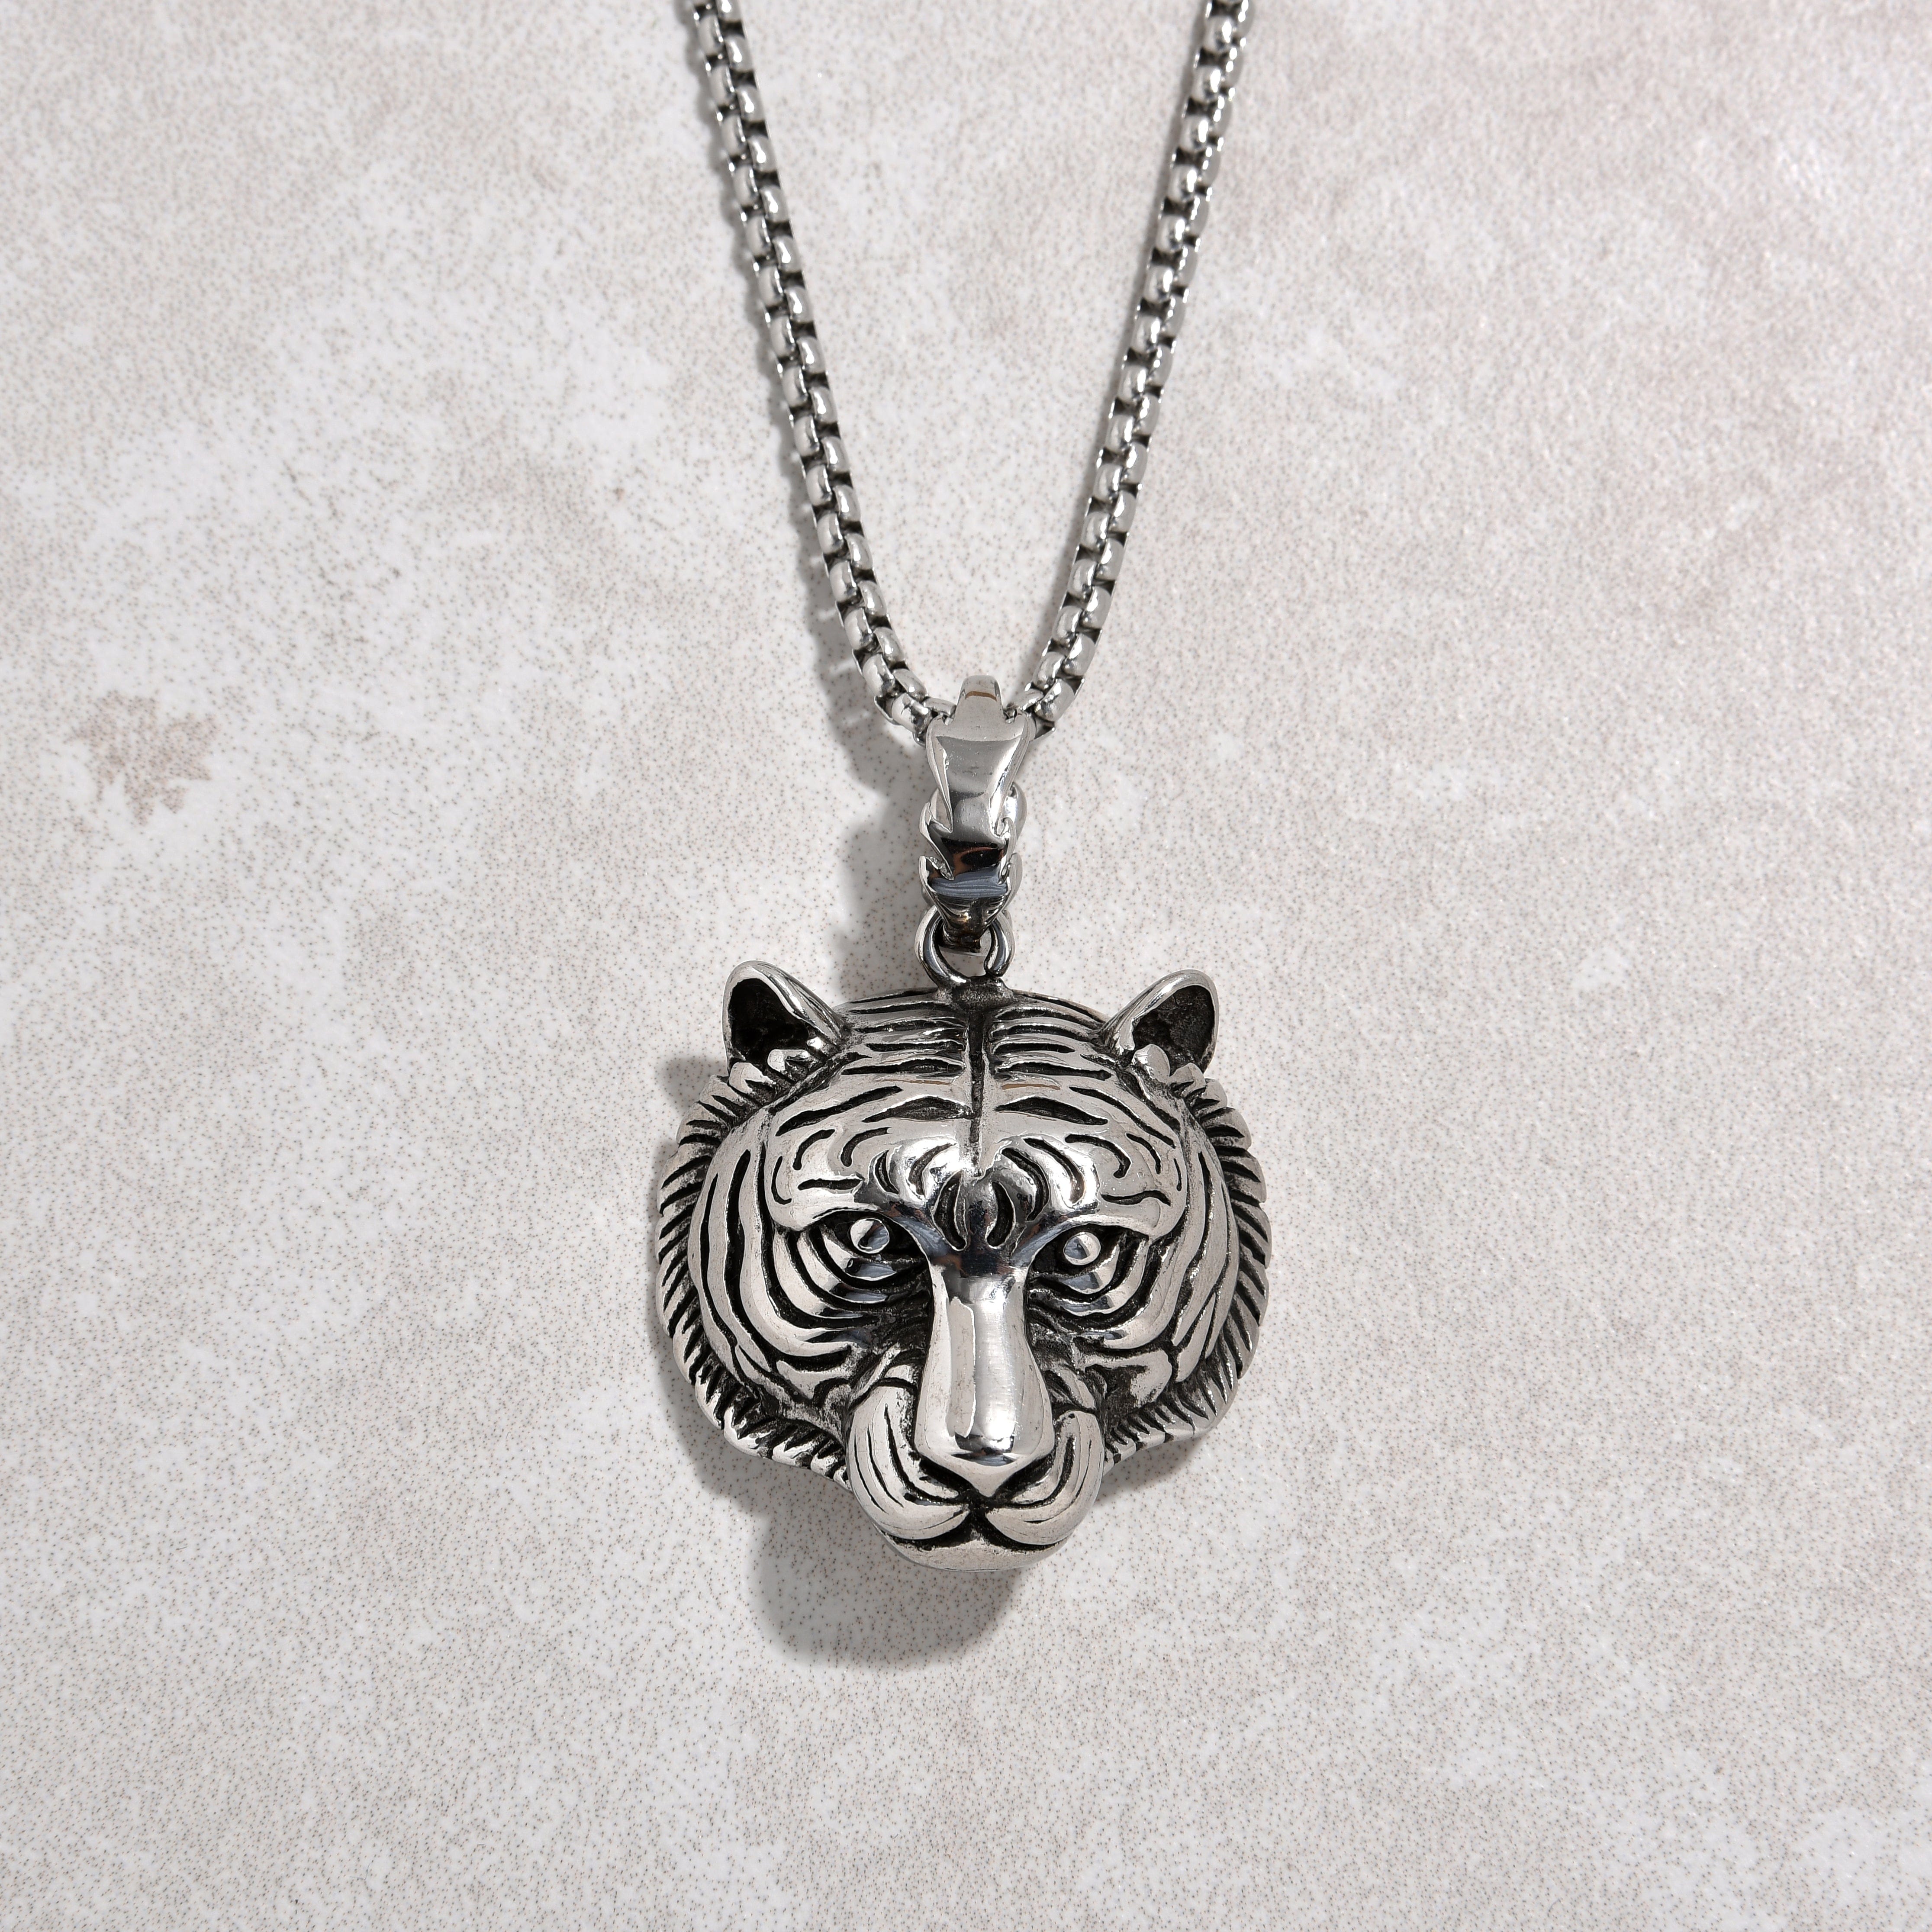 Kalifano Steel Hearts Jewelry Silver Tiger Steel Hearts Necklace SHN521-S